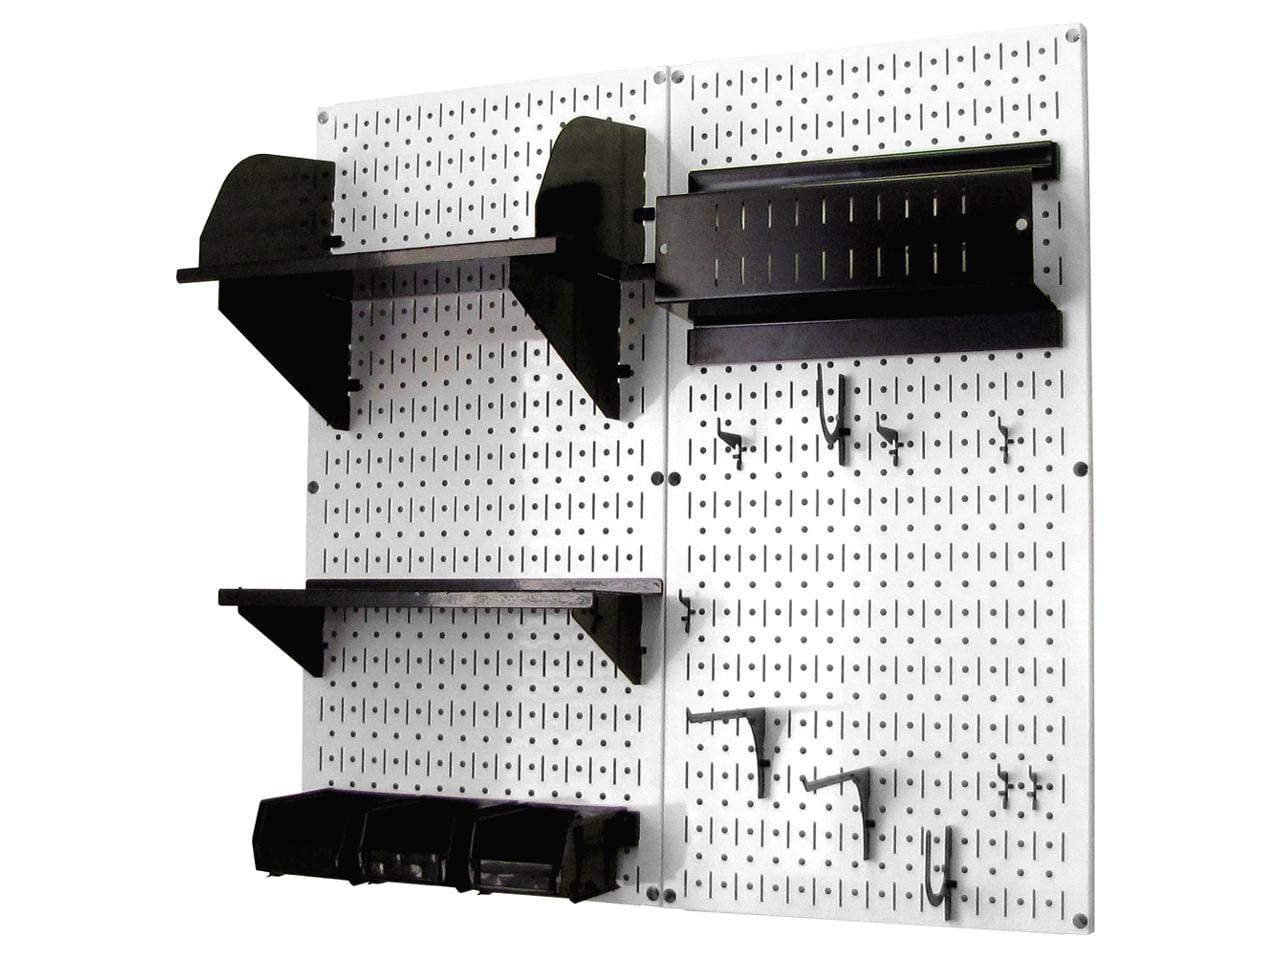 Wall Control Pegboard Hobby Craft Pegboard Organizer Storage Kit with White  Pegboard and Black Accessories